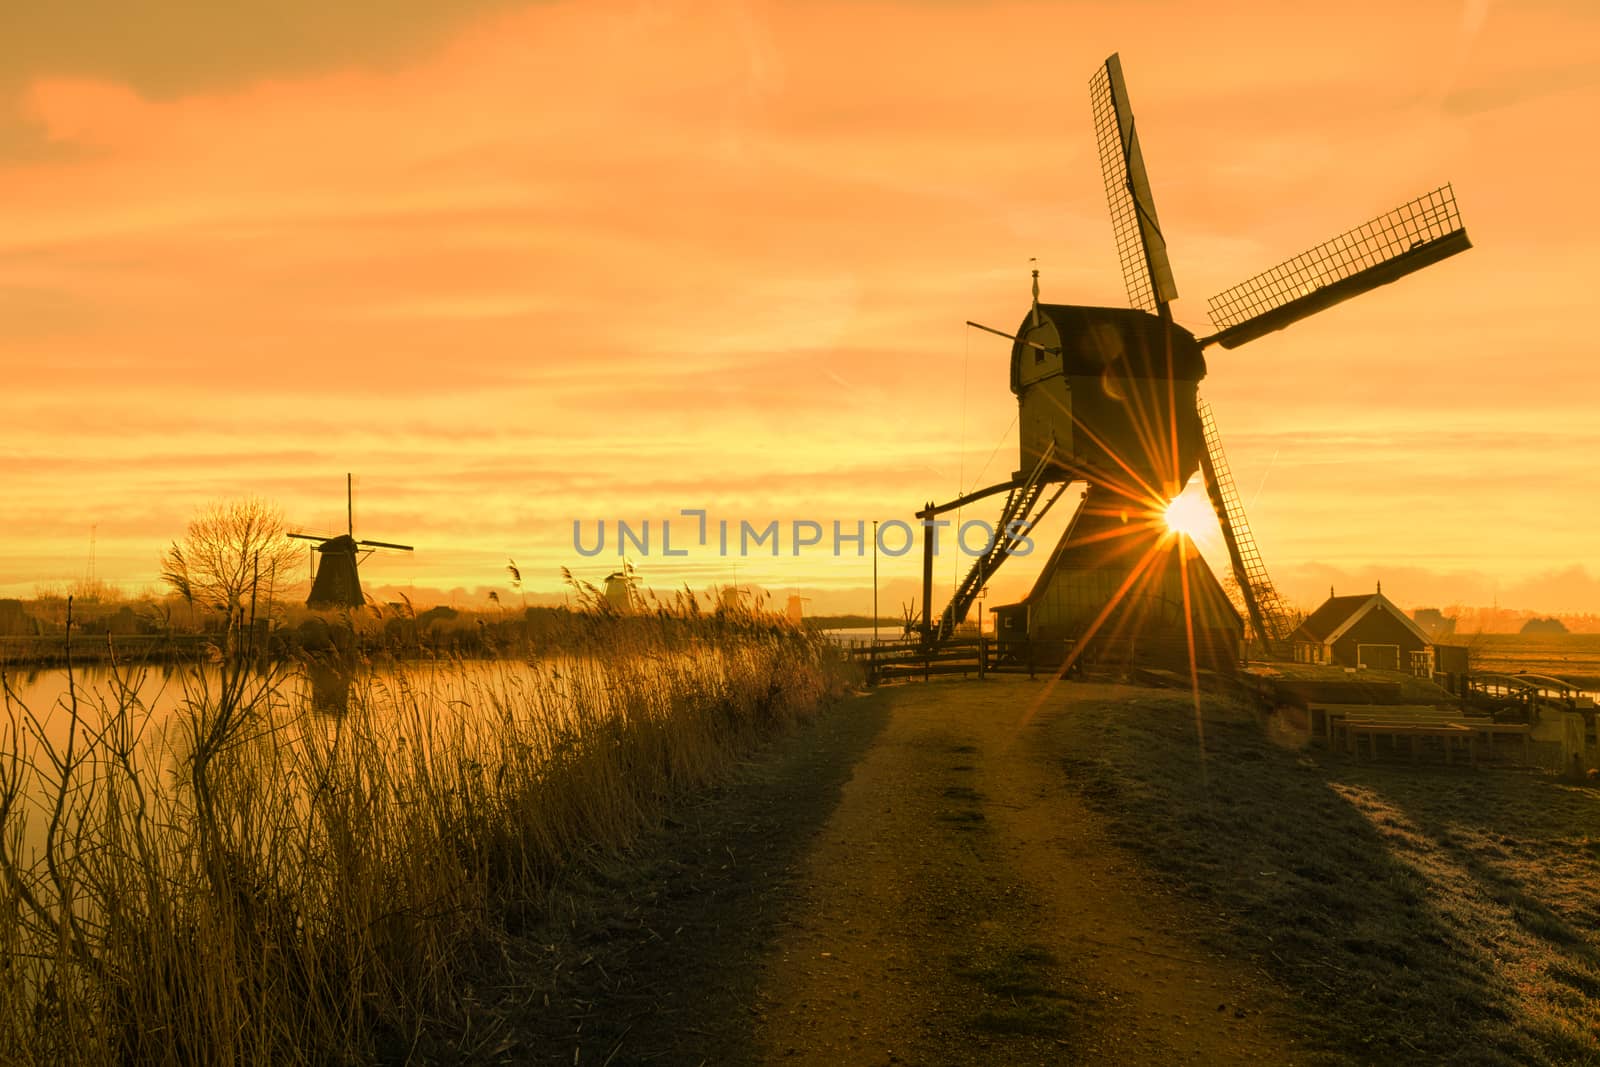 Twight light sunrise on the Unesco heritage windmill silhouette at the middle of the canal, Alblasserdam, Netherlands